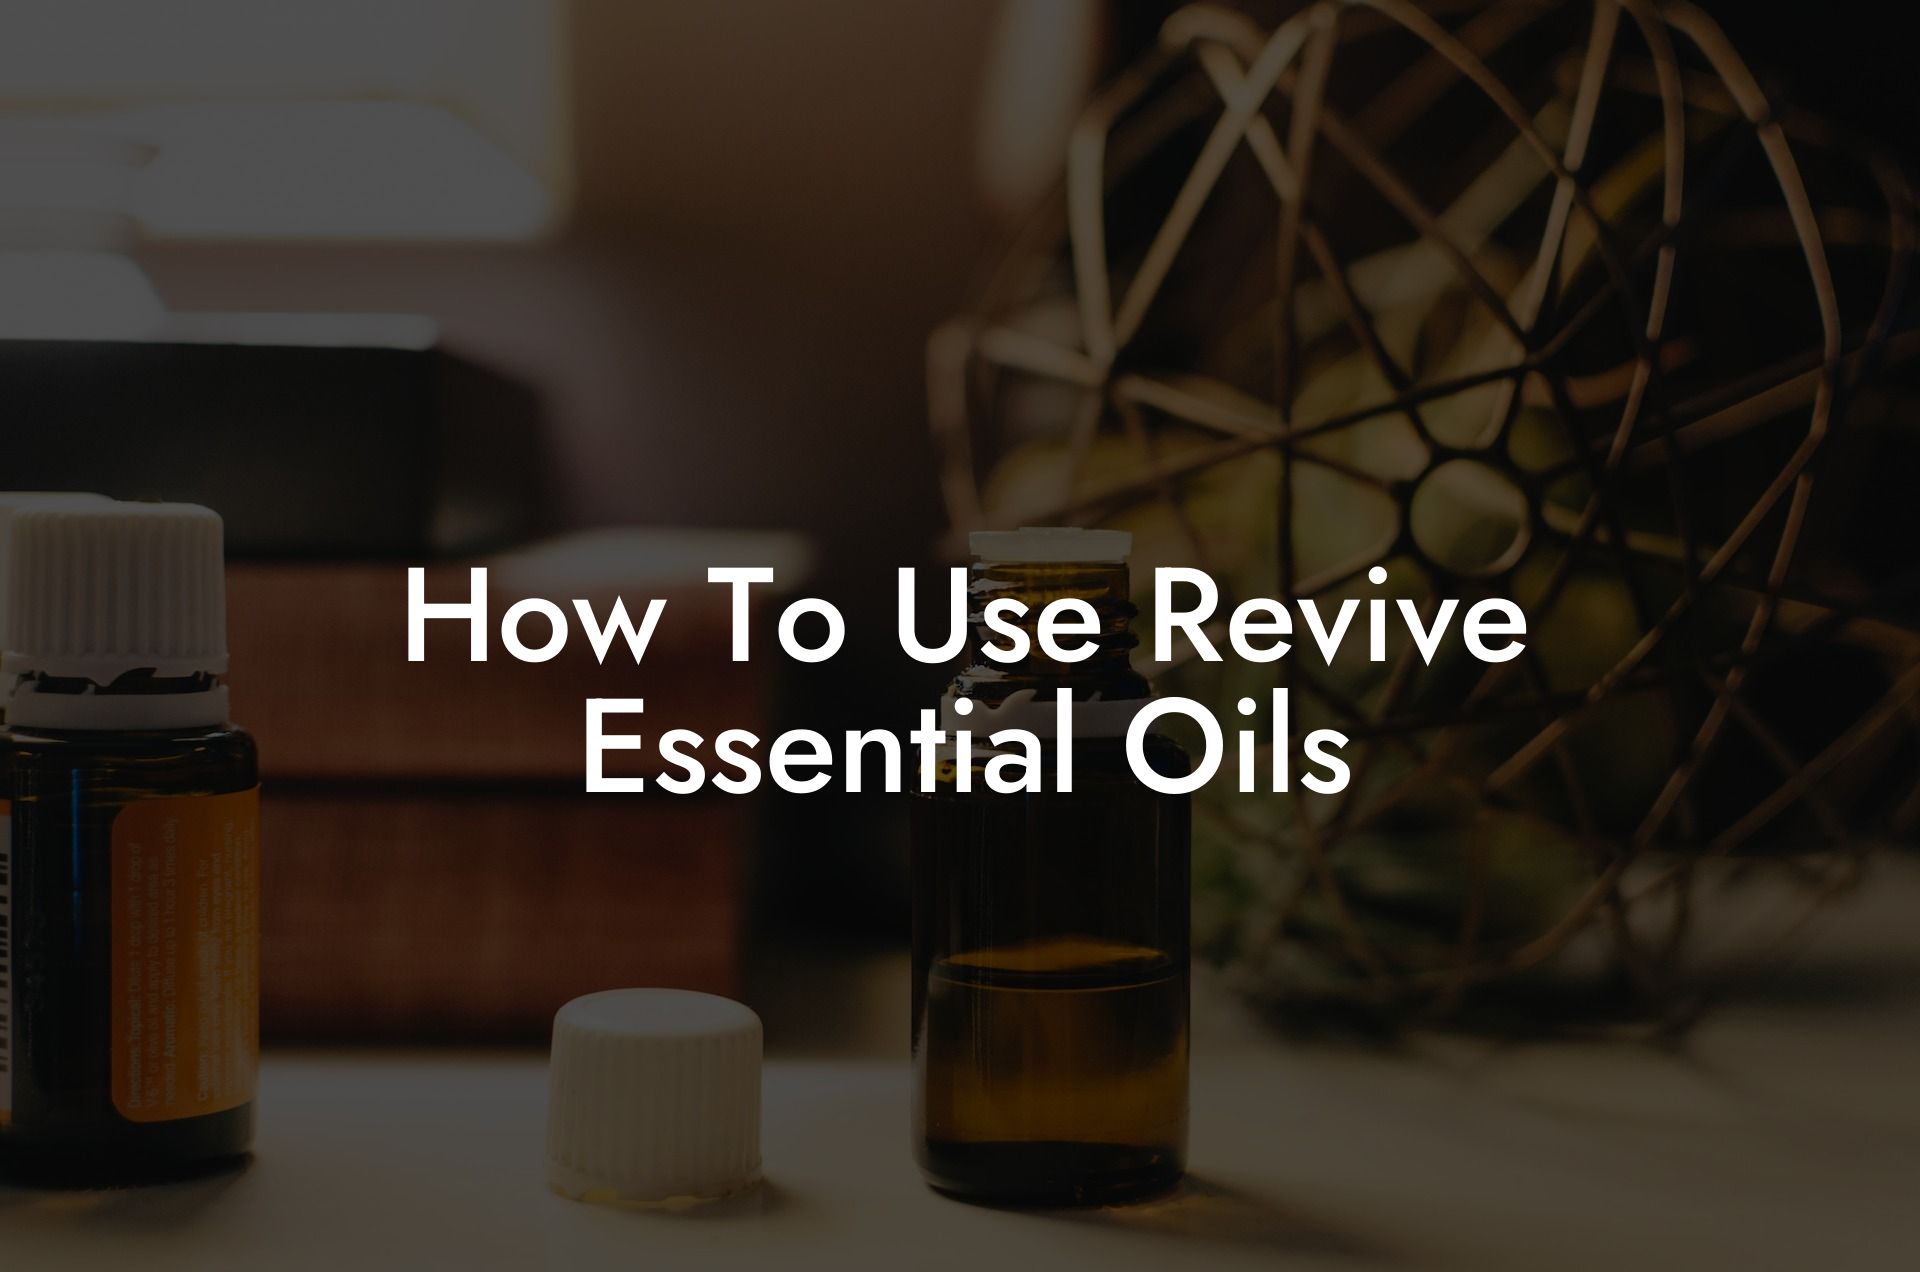 How To Use Revive Essential Oils